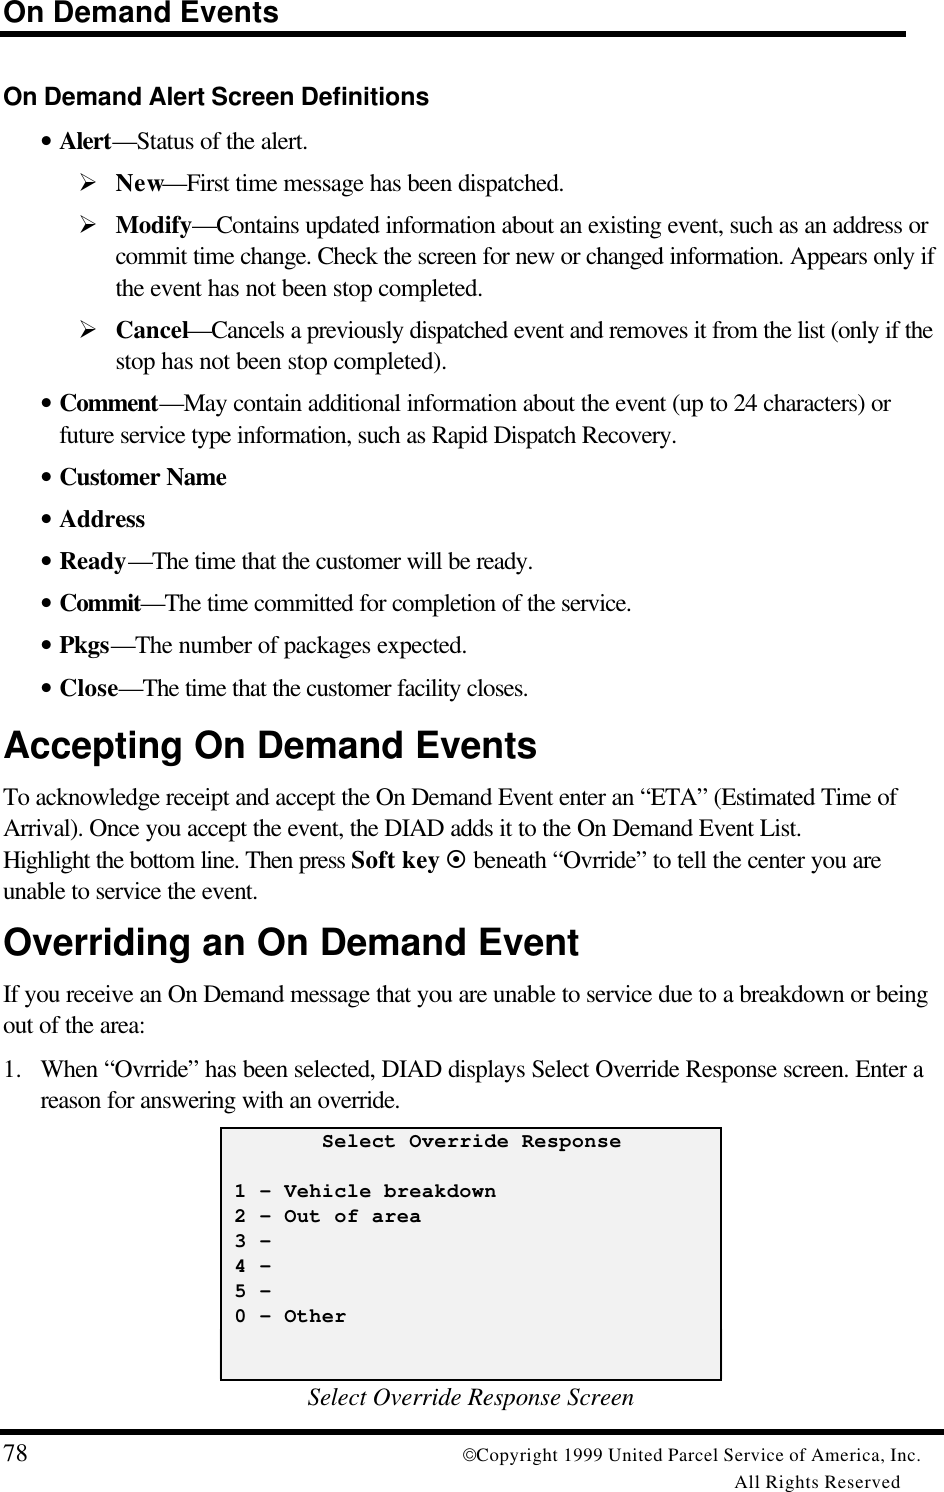 On Demand Events78 Copyright 1999 United Parcel Service of America, Inc.All Rights ReservedOn Demand Alert Screen Definitions• Alert—Status of the alert.Ø New—First time message has been dispatched.Ø Modify—Contains updated information about an existing event, such as an address orcommit time change. Check the screen for new or changed information. Appears only ifthe event has not been stop completed.Ø Cancel—Cancels a previously dispatched event and removes it from the list (only if thestop has not been stop completed).• Comment—May contain additional information about the event (up to 24 characters) orfuture service type information, such as Rapid Dispatch Recovery.• Customer Name• Address• Ready—The time that the customer will be ready.• Commit—The time committed for completion of the service.• Pkgs—The number of packages expected.• Close—The time that the customer facility closes.Accepting On Demand EventsTo acknowledge receipt and accept the On Demand Event enter an “ETA” (Estimated Time ofArrival). Once you accept the event, the DIAD adds it to the On Demand Event List.Highlight the bottom line. Then press Soft key ¤ beneath “Ovrride” to tell the center you areunable to service the event.Overriding an On Demand EventIf you receive an On Demand message that you are unable to service due to a breakdown or beingout of the area:1. When “Ovrride” has been selected, DIAD displays Select Override Response screen. Enter areason for answering with an override.        Select Override Response 1 – Vehicle breakdown 2 – Out of area 3 - 4 - 5 - 0 – OtherSelect Override Response Screen